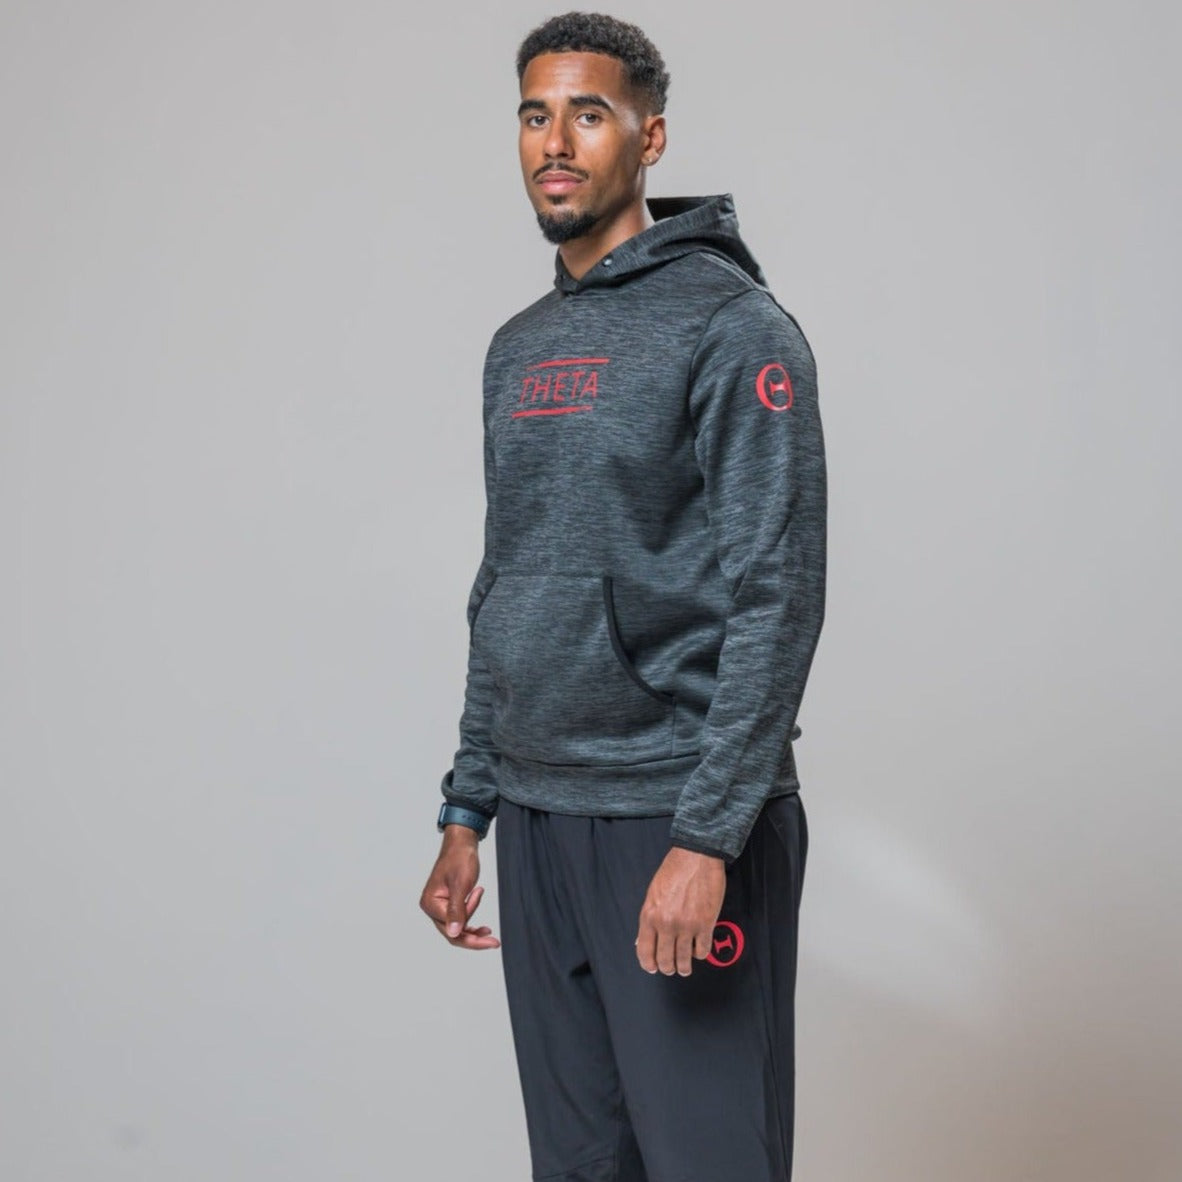 Complete look of our THETA thermo hoodie and THETA core trackies. Finished with red nike metcon 8's.